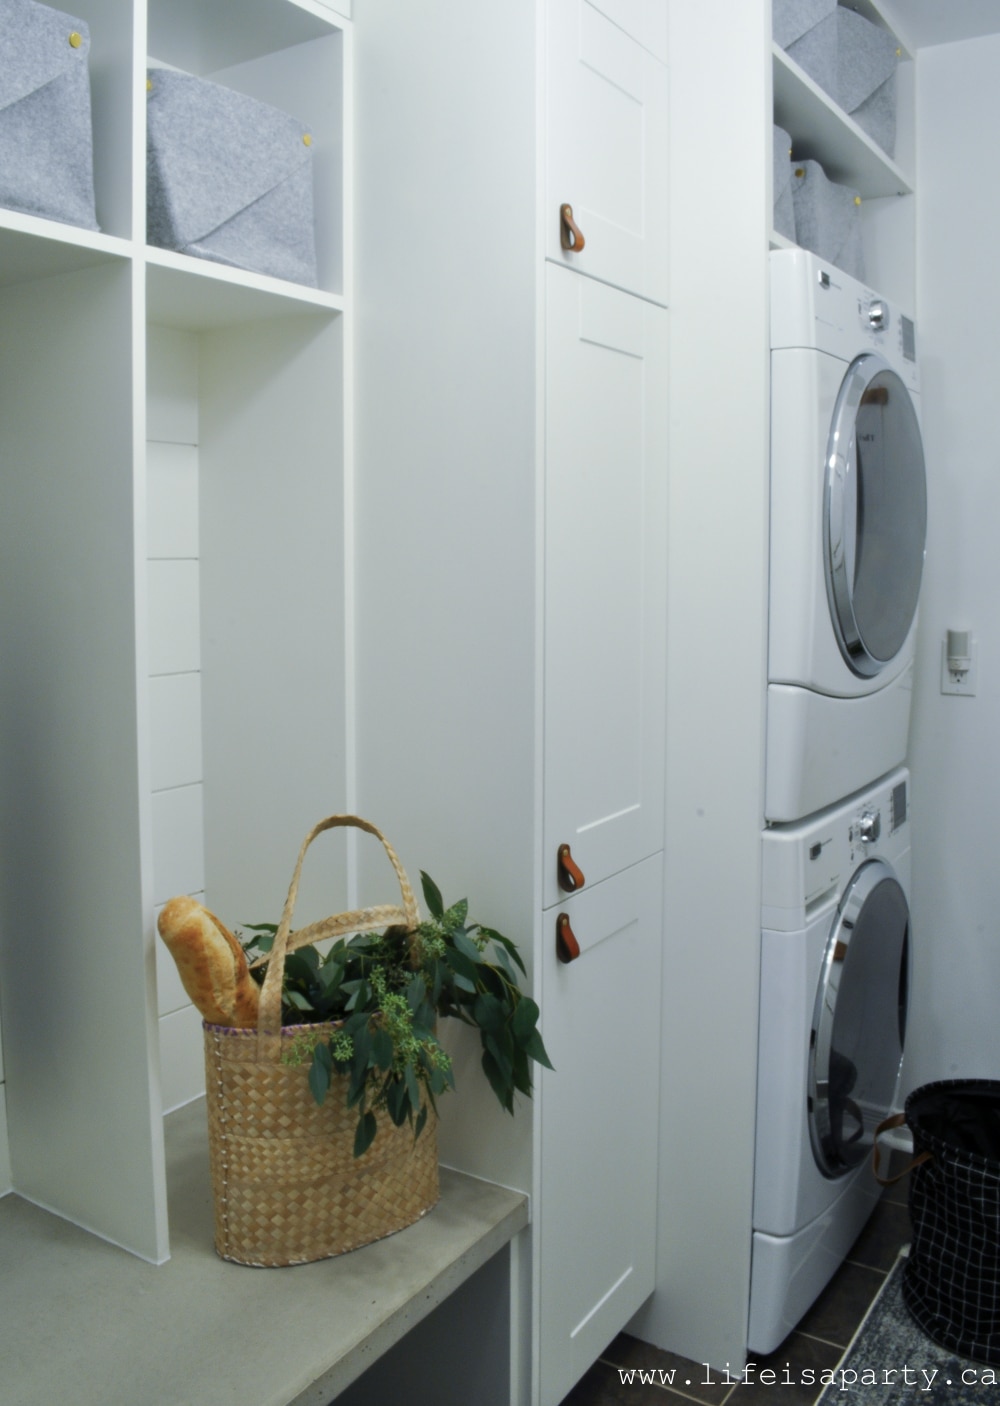 Laundry Room / Mudroom Makeover Reveal